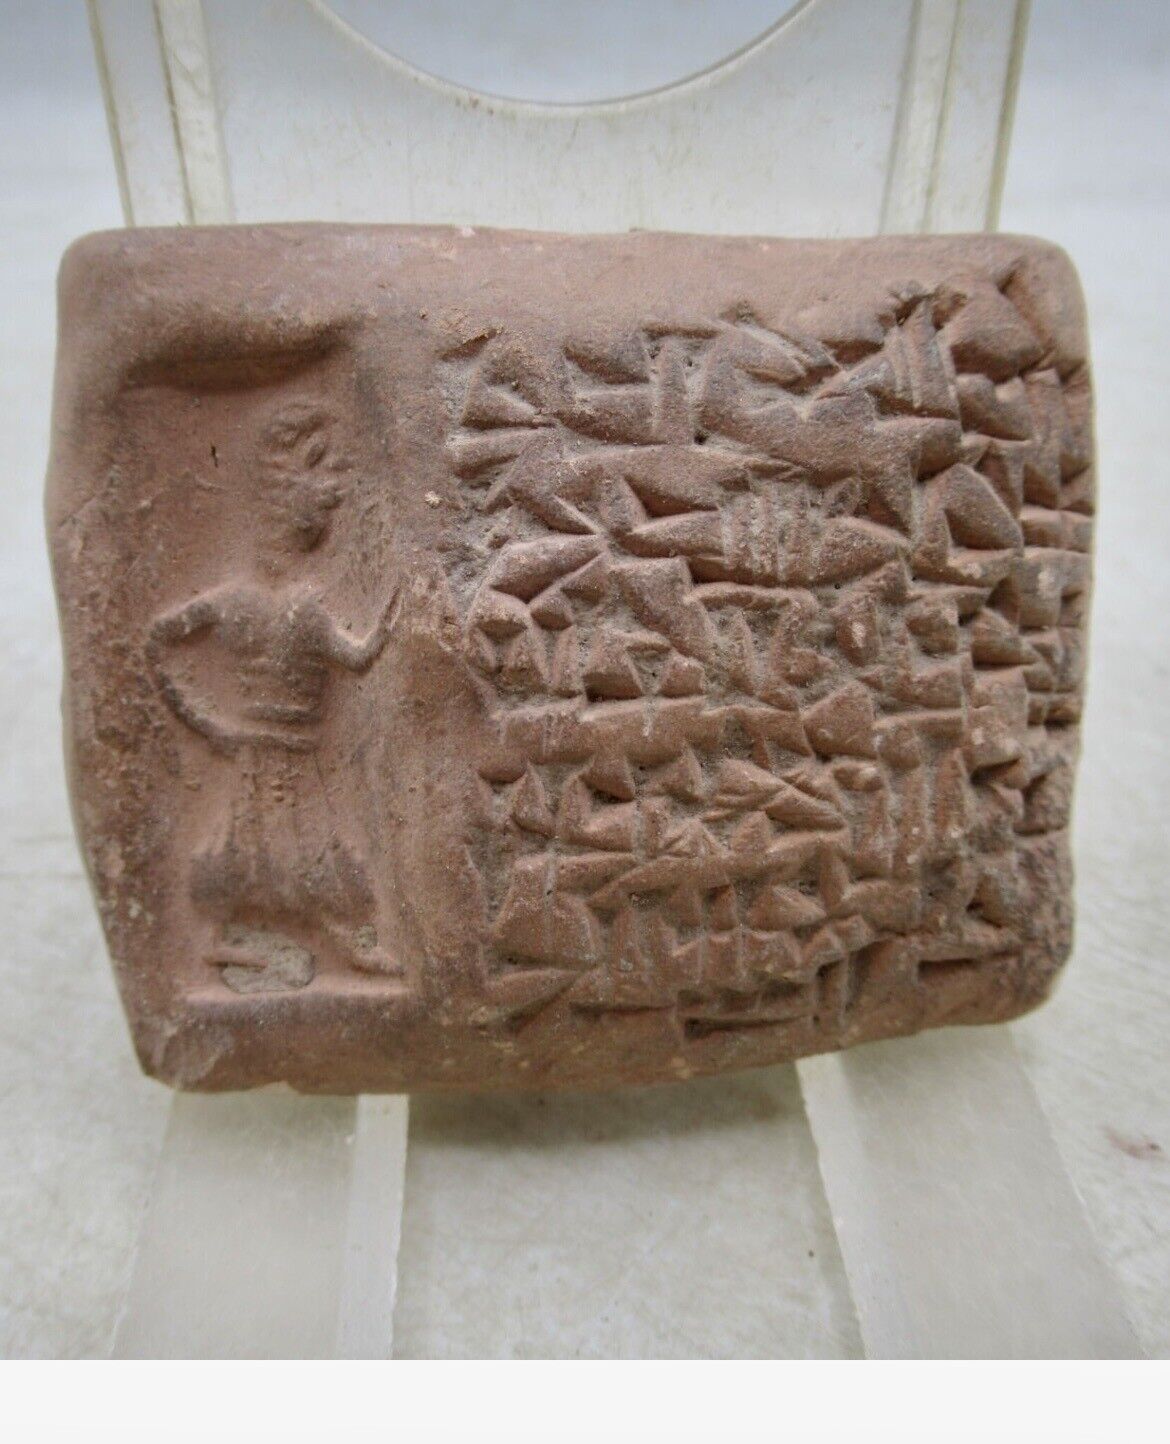 AMAZING NEAR EASTERN STONE TABLET WITH EARLY FORM OF WRITING CIRCA 3000 BCE